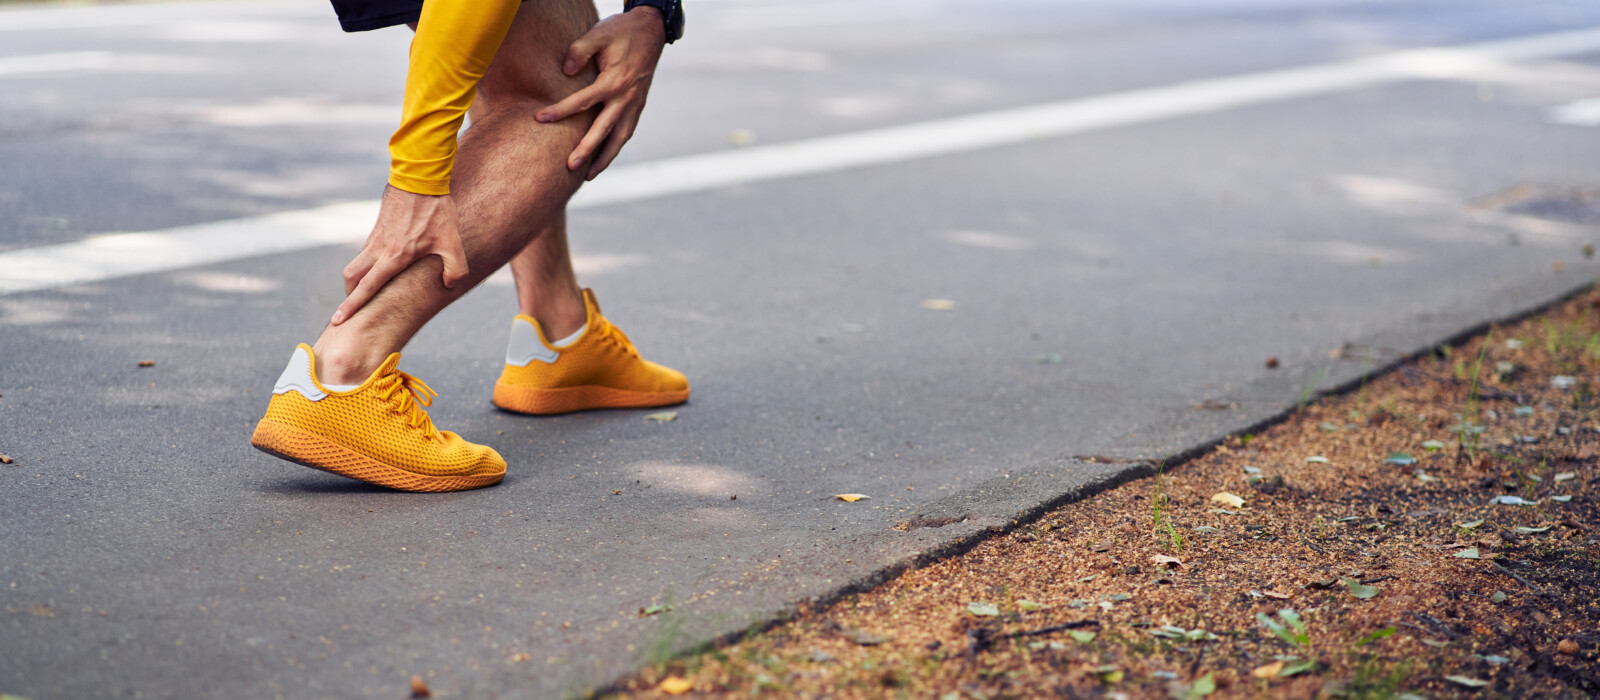 What Is Achilles Tendinitis and What Are the Symptoms?